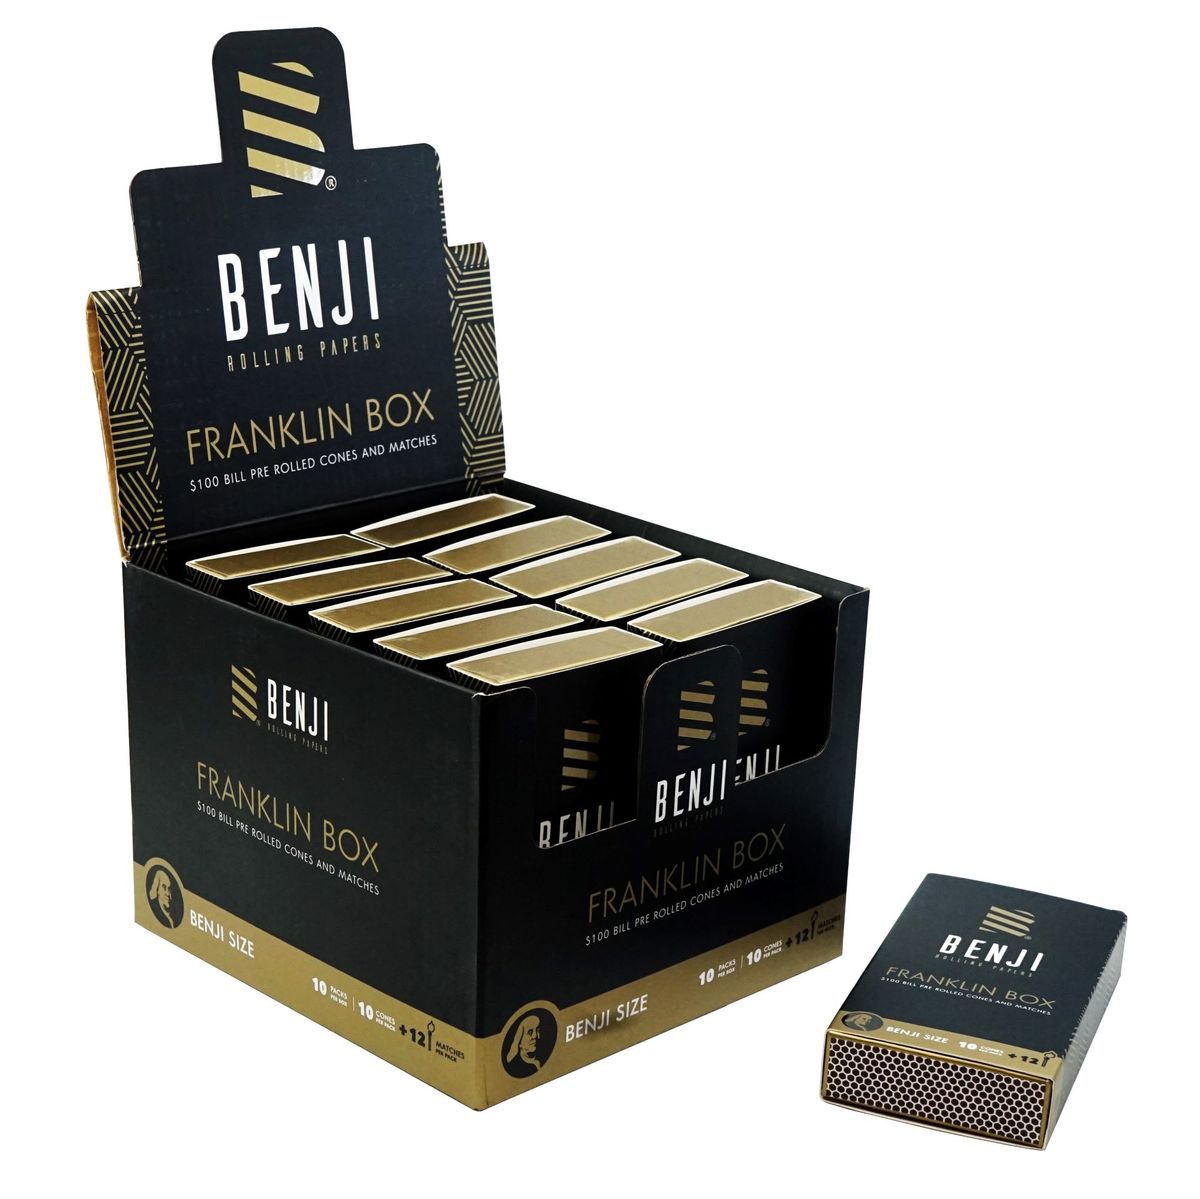 benji papers franklin box cones matches